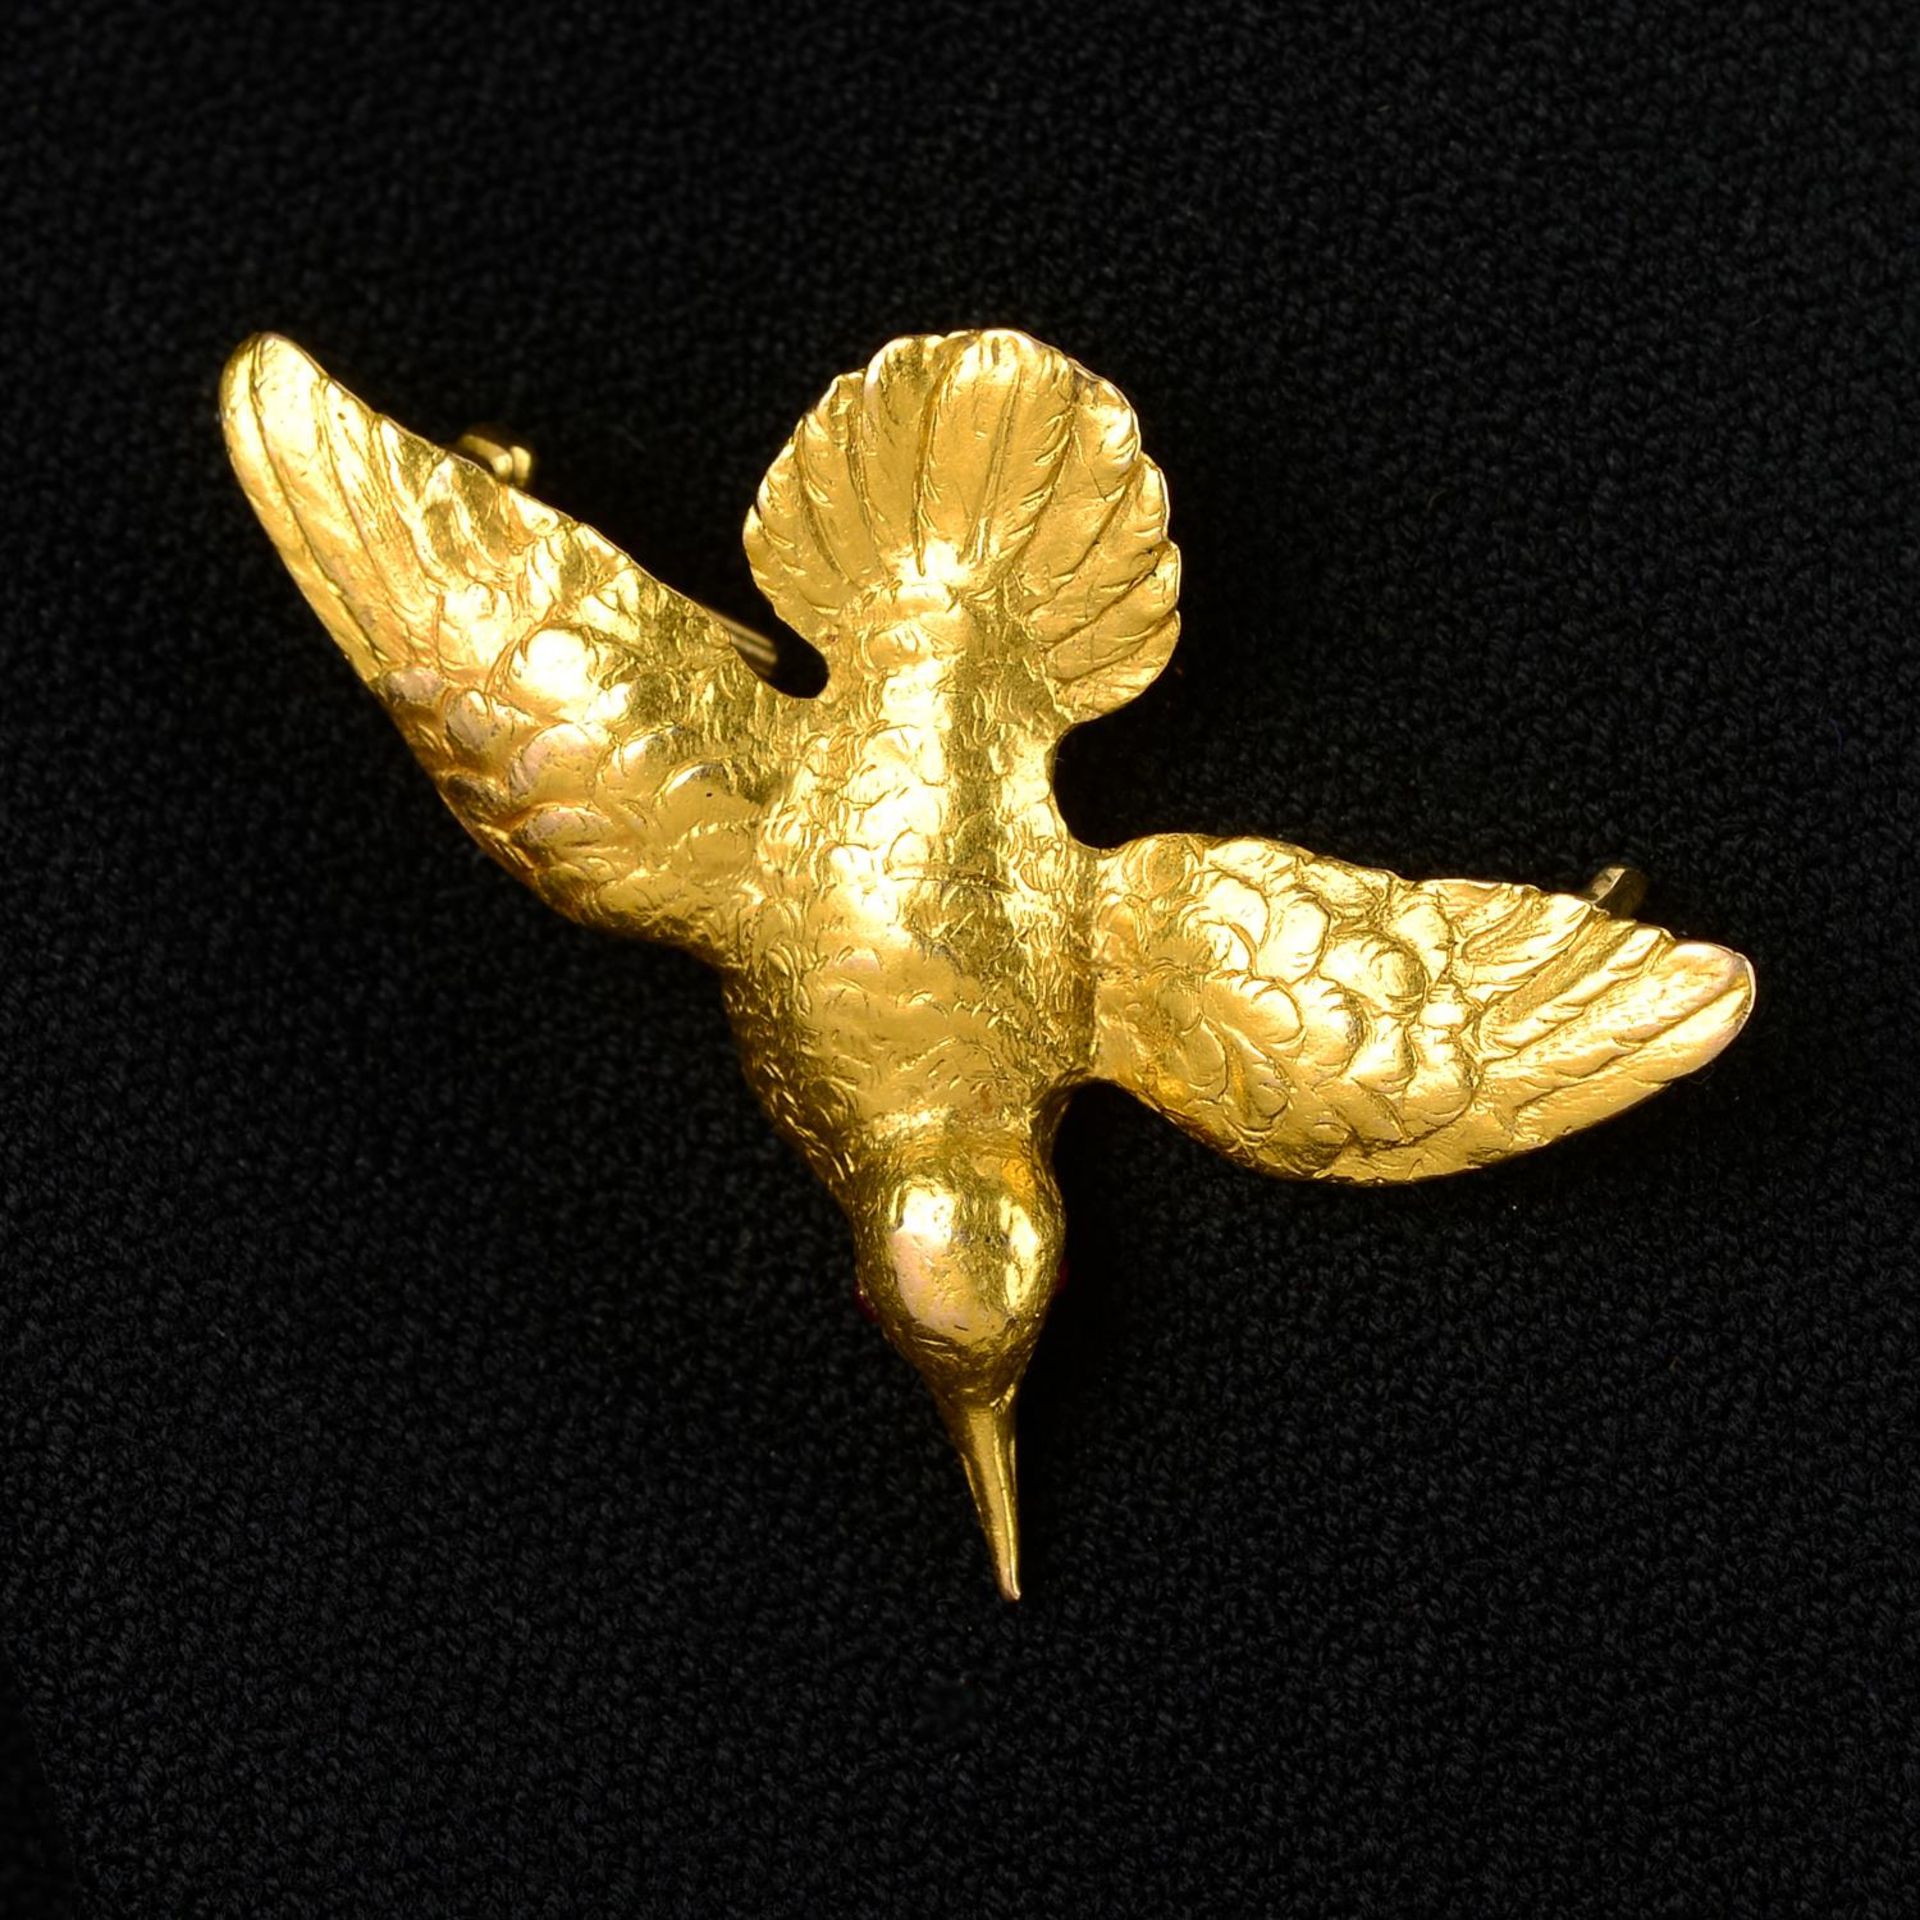 An early 20th century gold bird brooch, possibly a hummingbird, with ruby eyes.